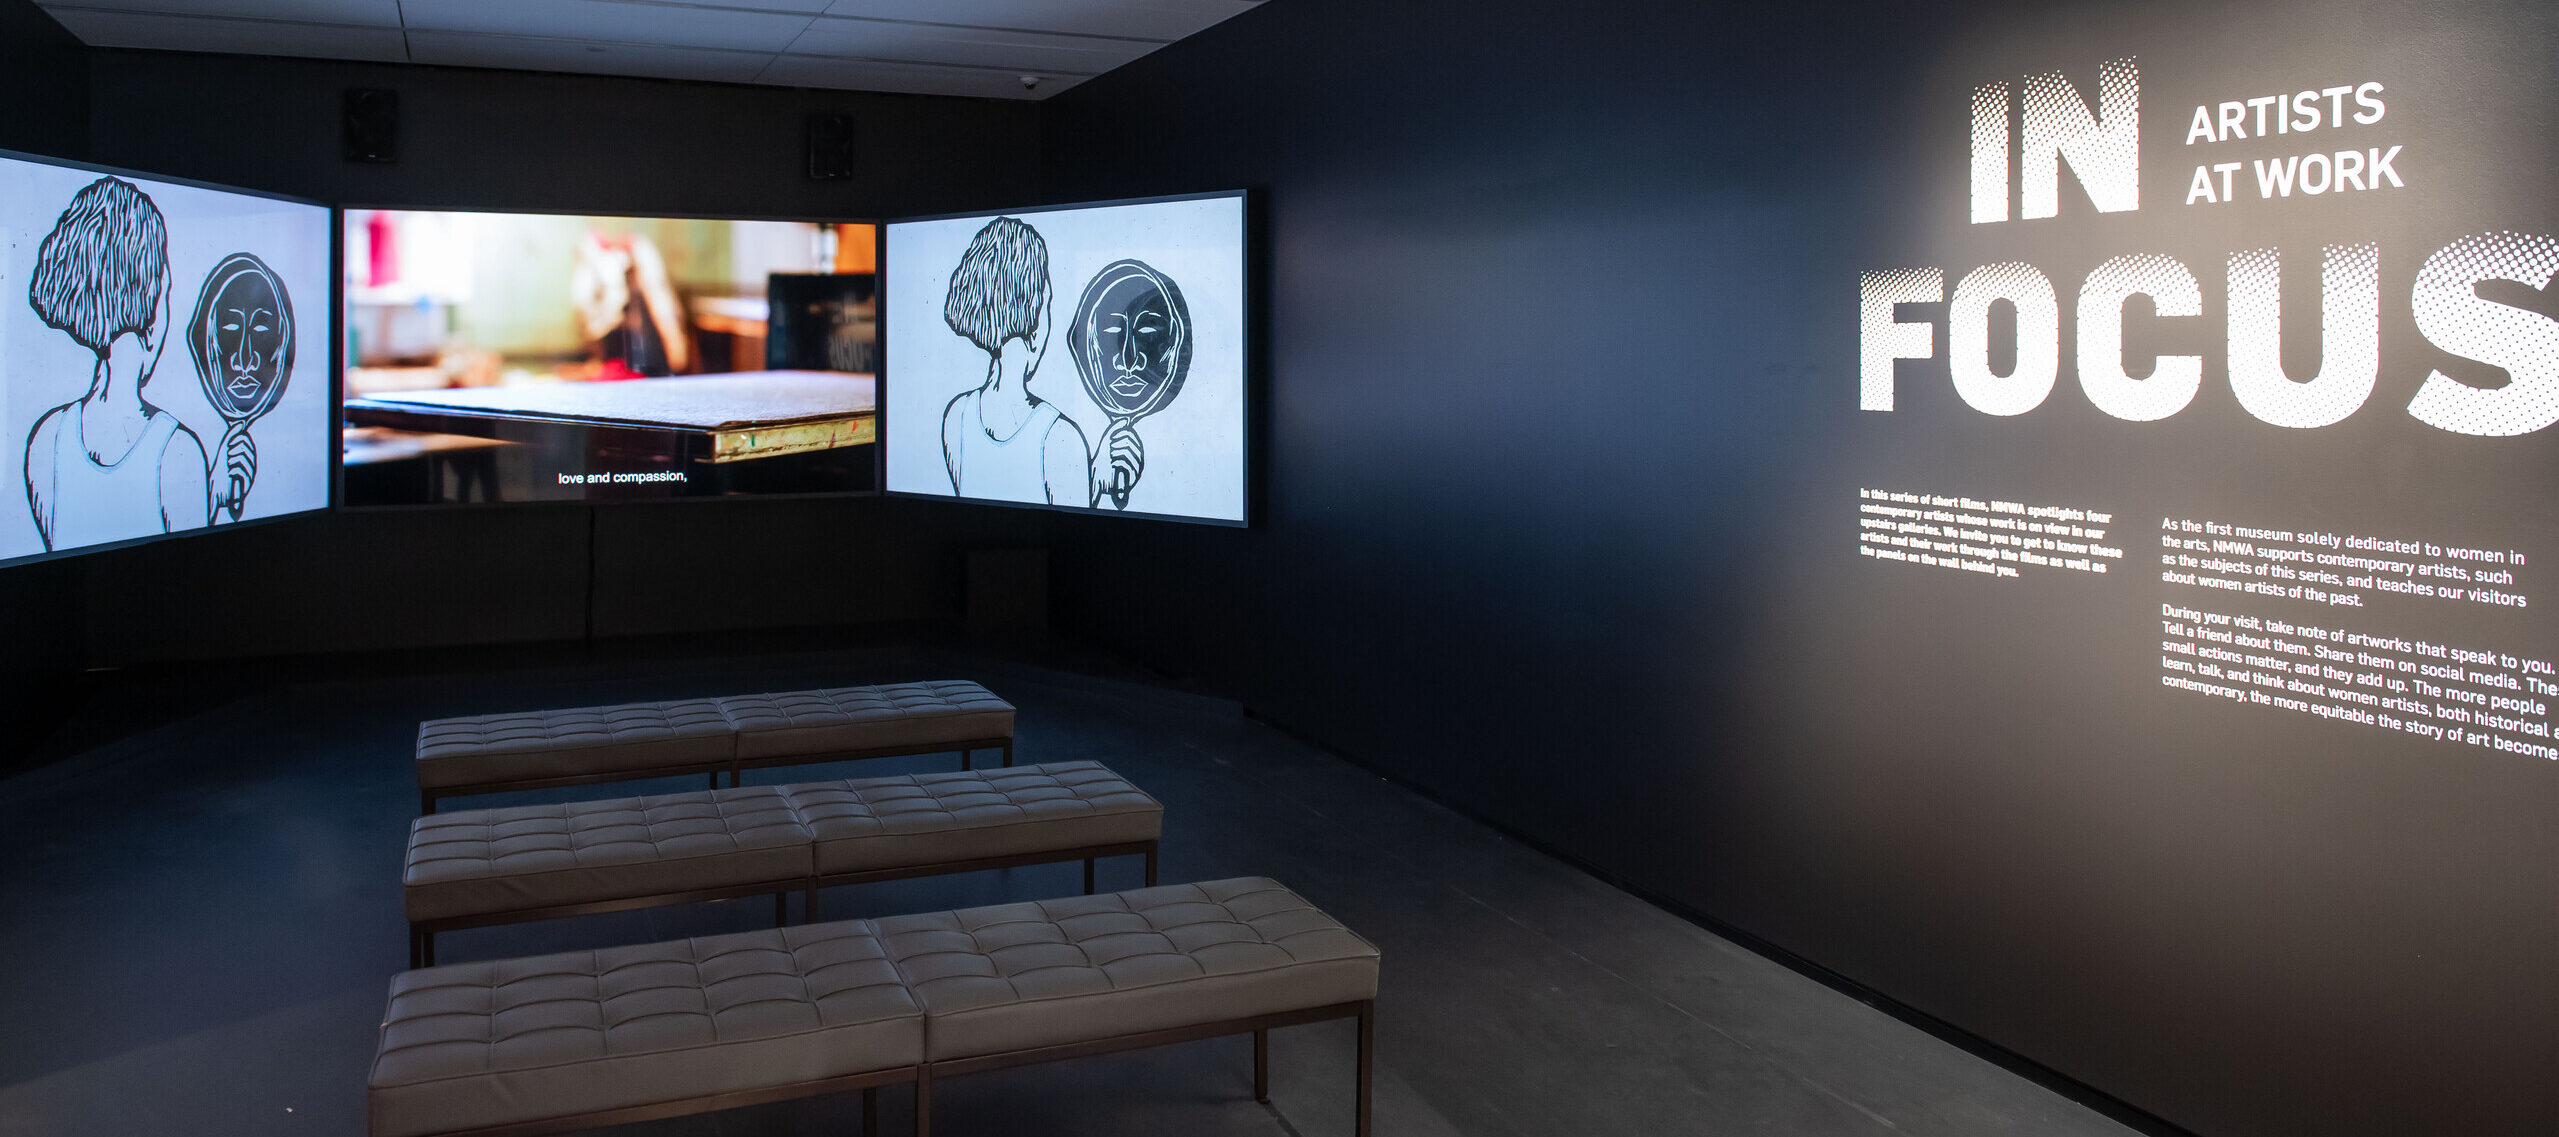 A dark gallery space with three large screens playing a video. Three tufted benches are in front of the screens. On the right wall, it says "In Focus: Artists at Work."